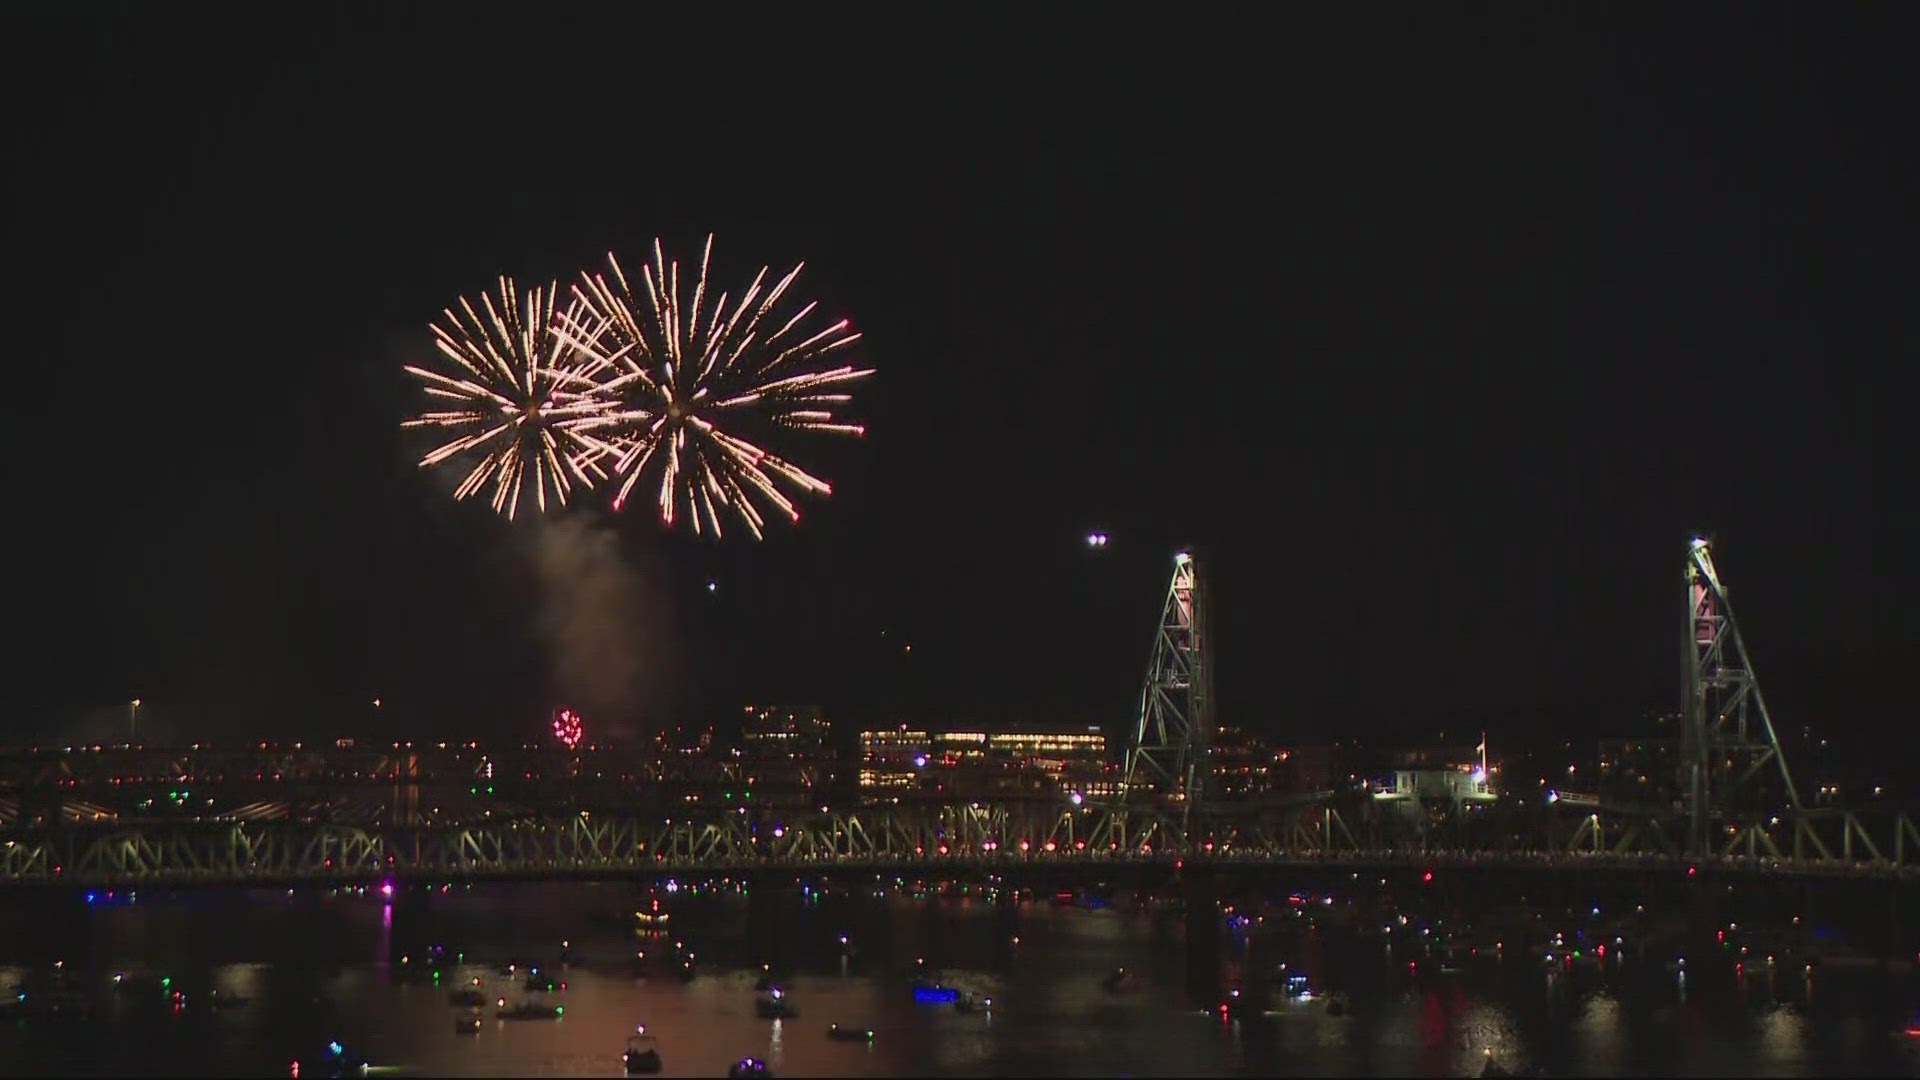 Organizers say it's Oregon's largest 4th of July fireworks celebration.